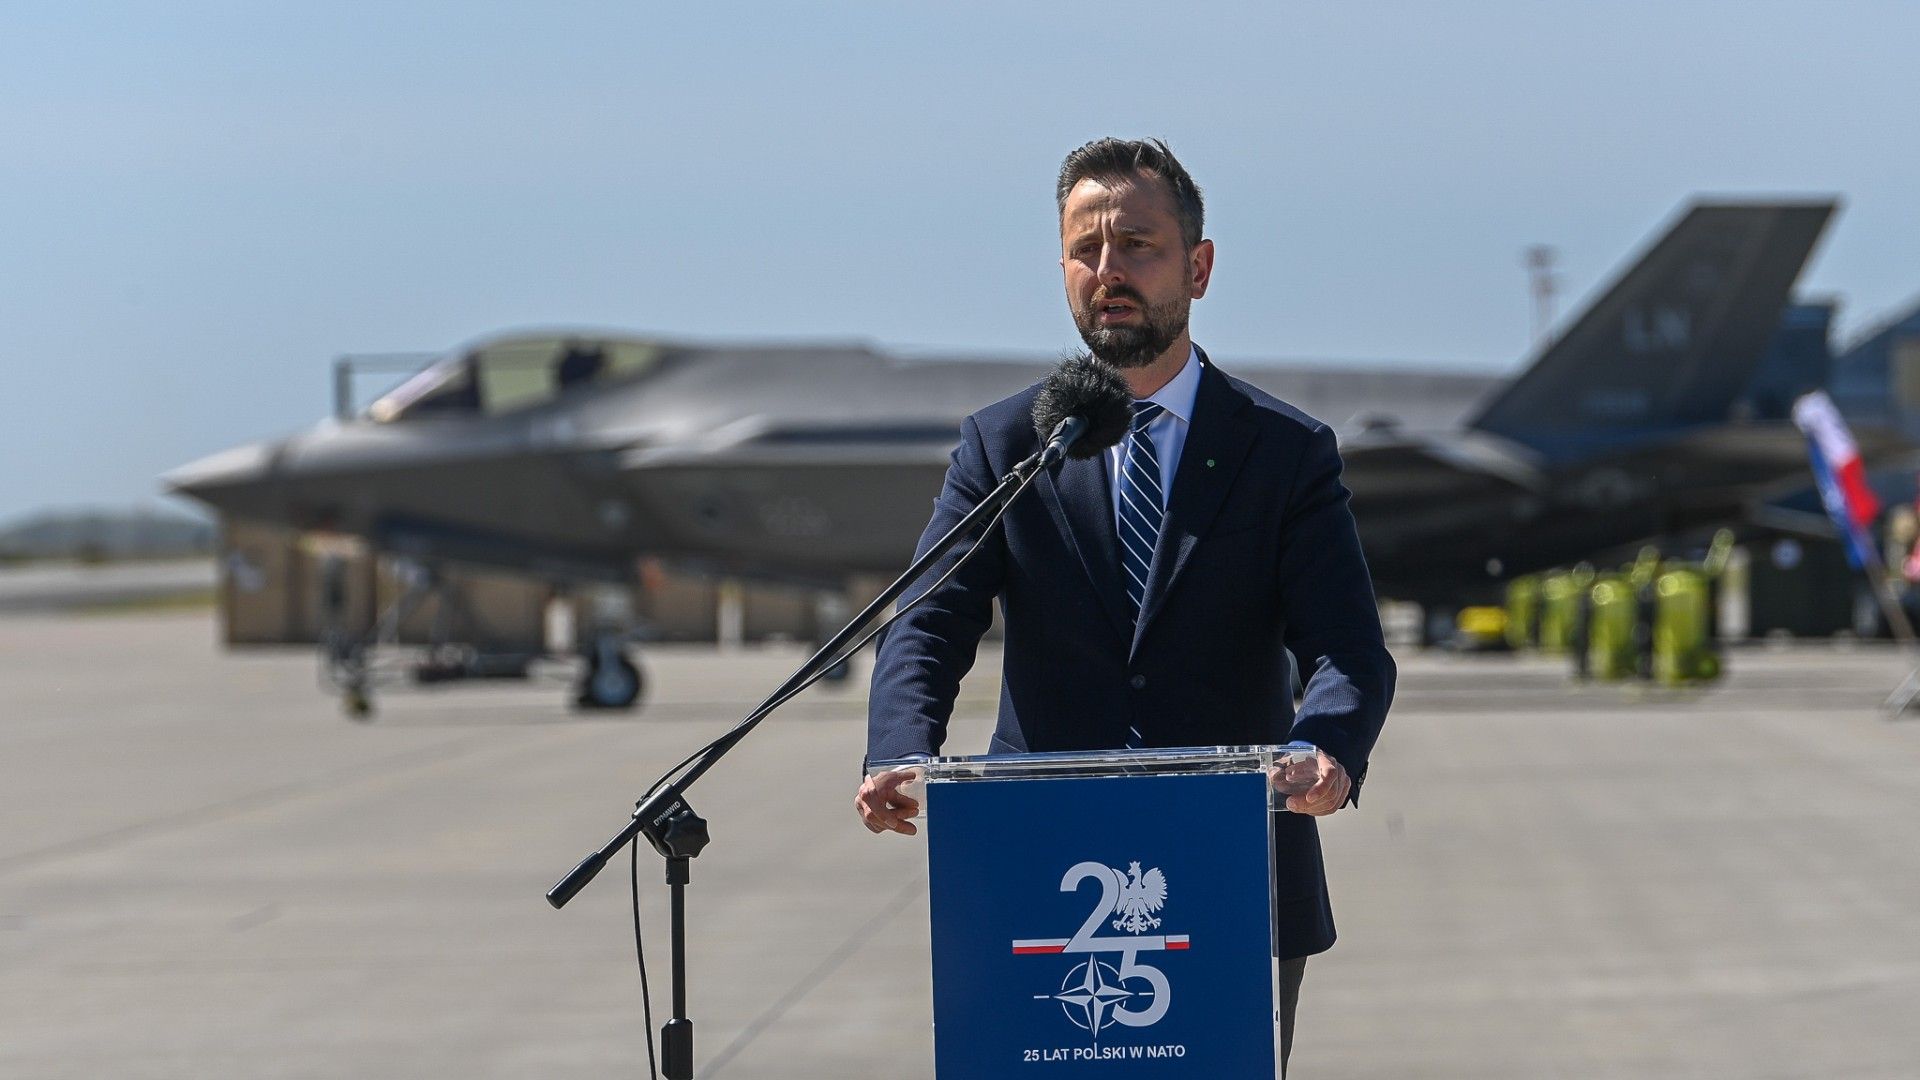 Head of the Ministry of National Defense: The first F-35 aircraft will soon enter our air force